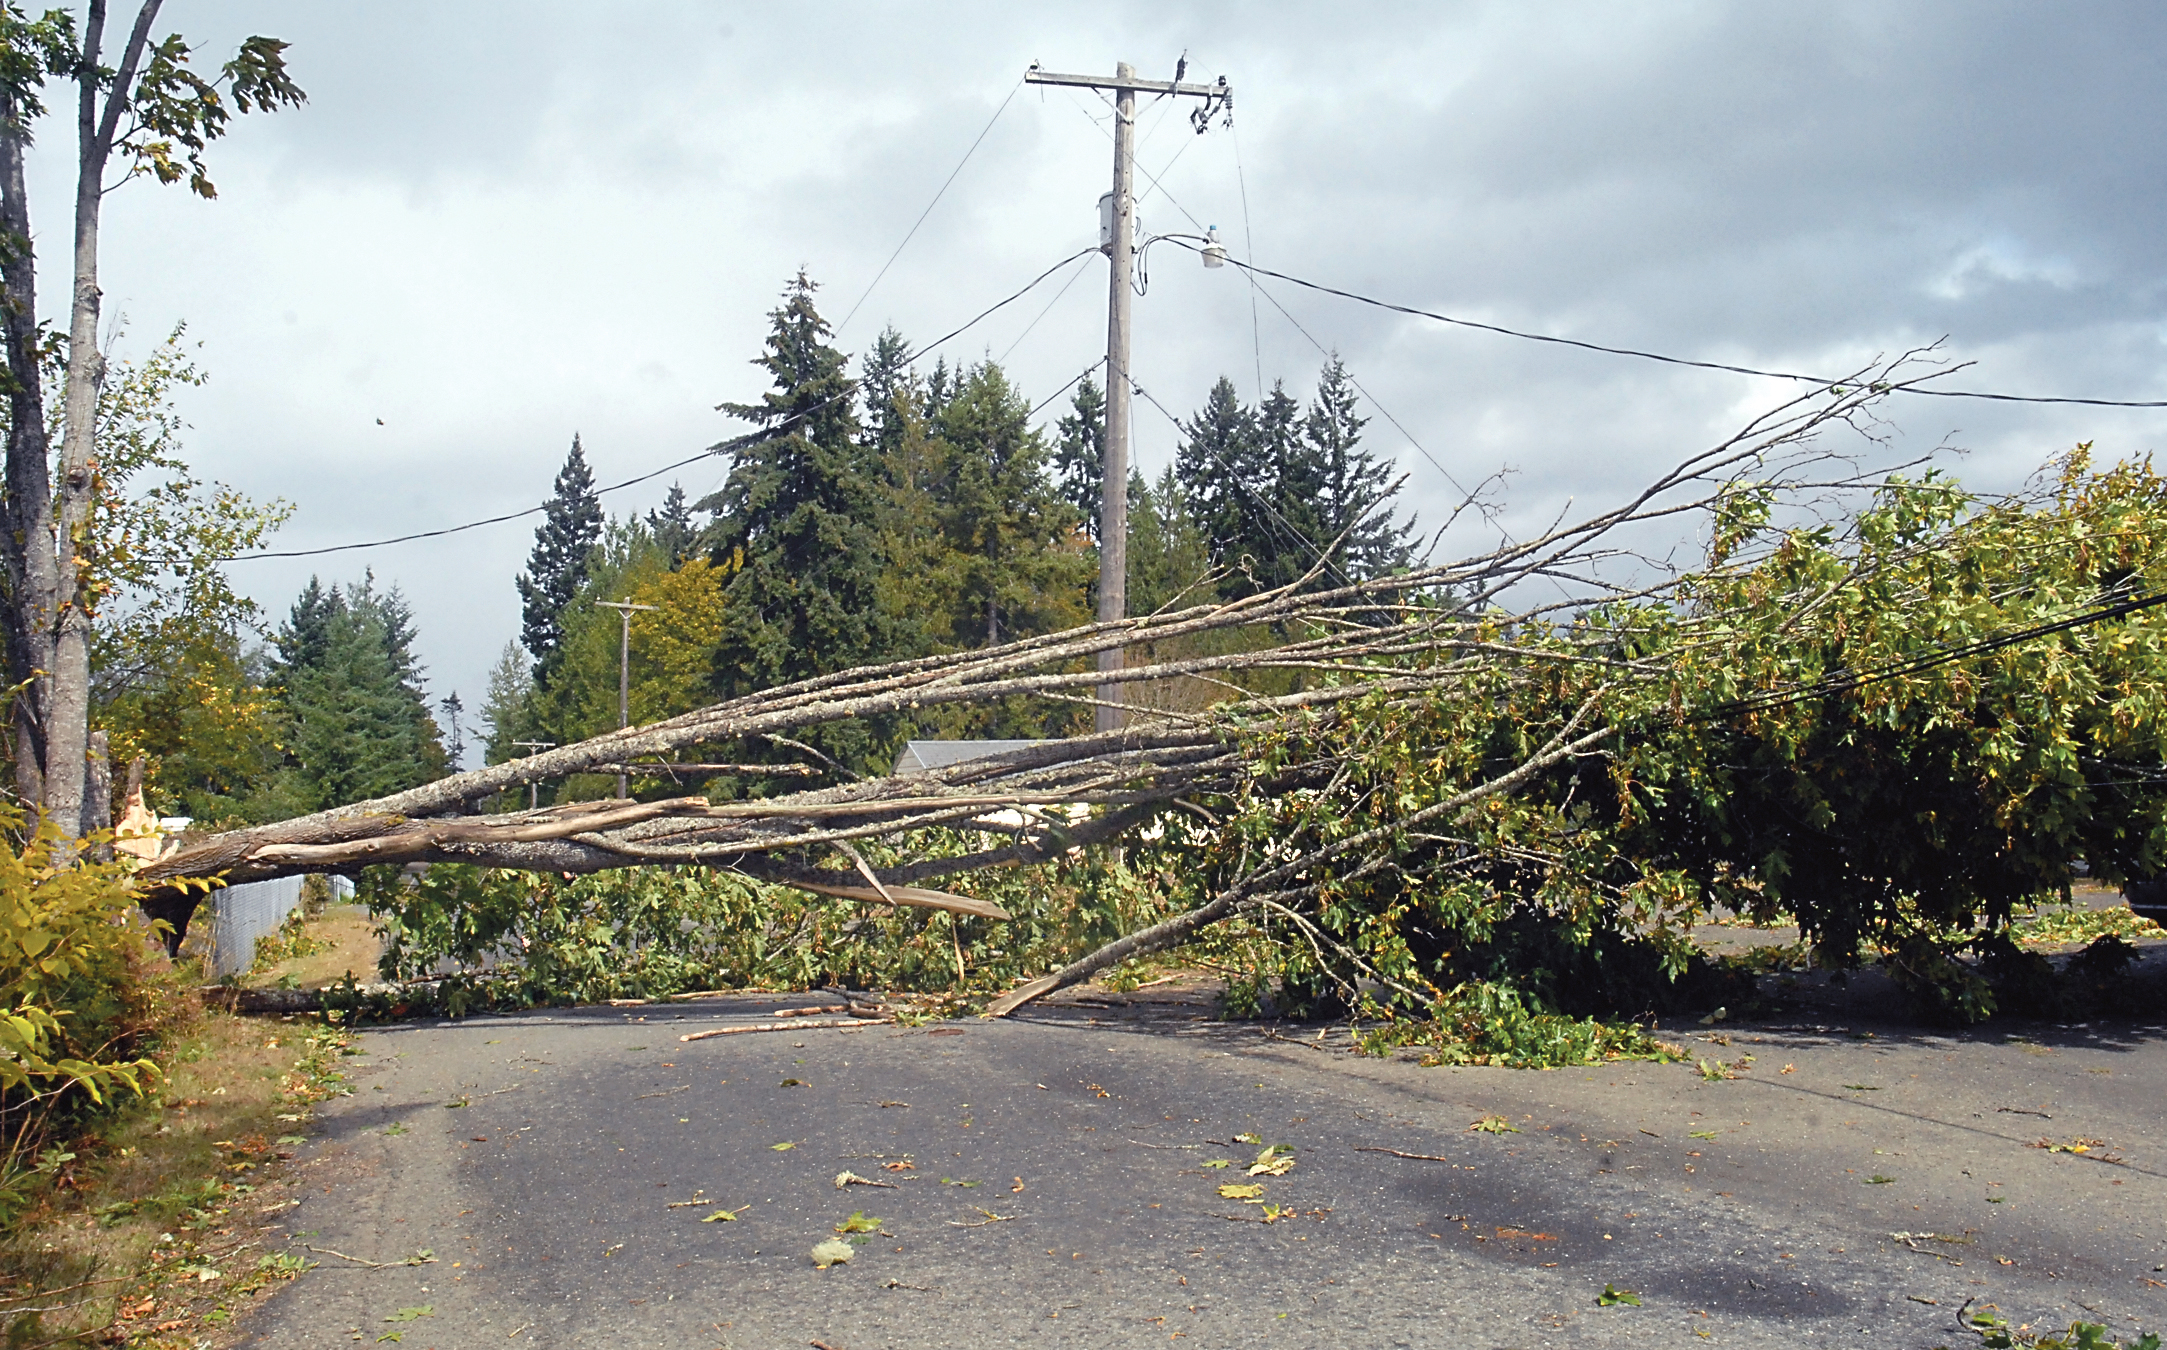 A toppled tree draped over power lines blocks Tiller Road near Scrivner Road south of Port Angeles after high winds struck the area Saturday. Keith Thorpe/Peninsula Daily News